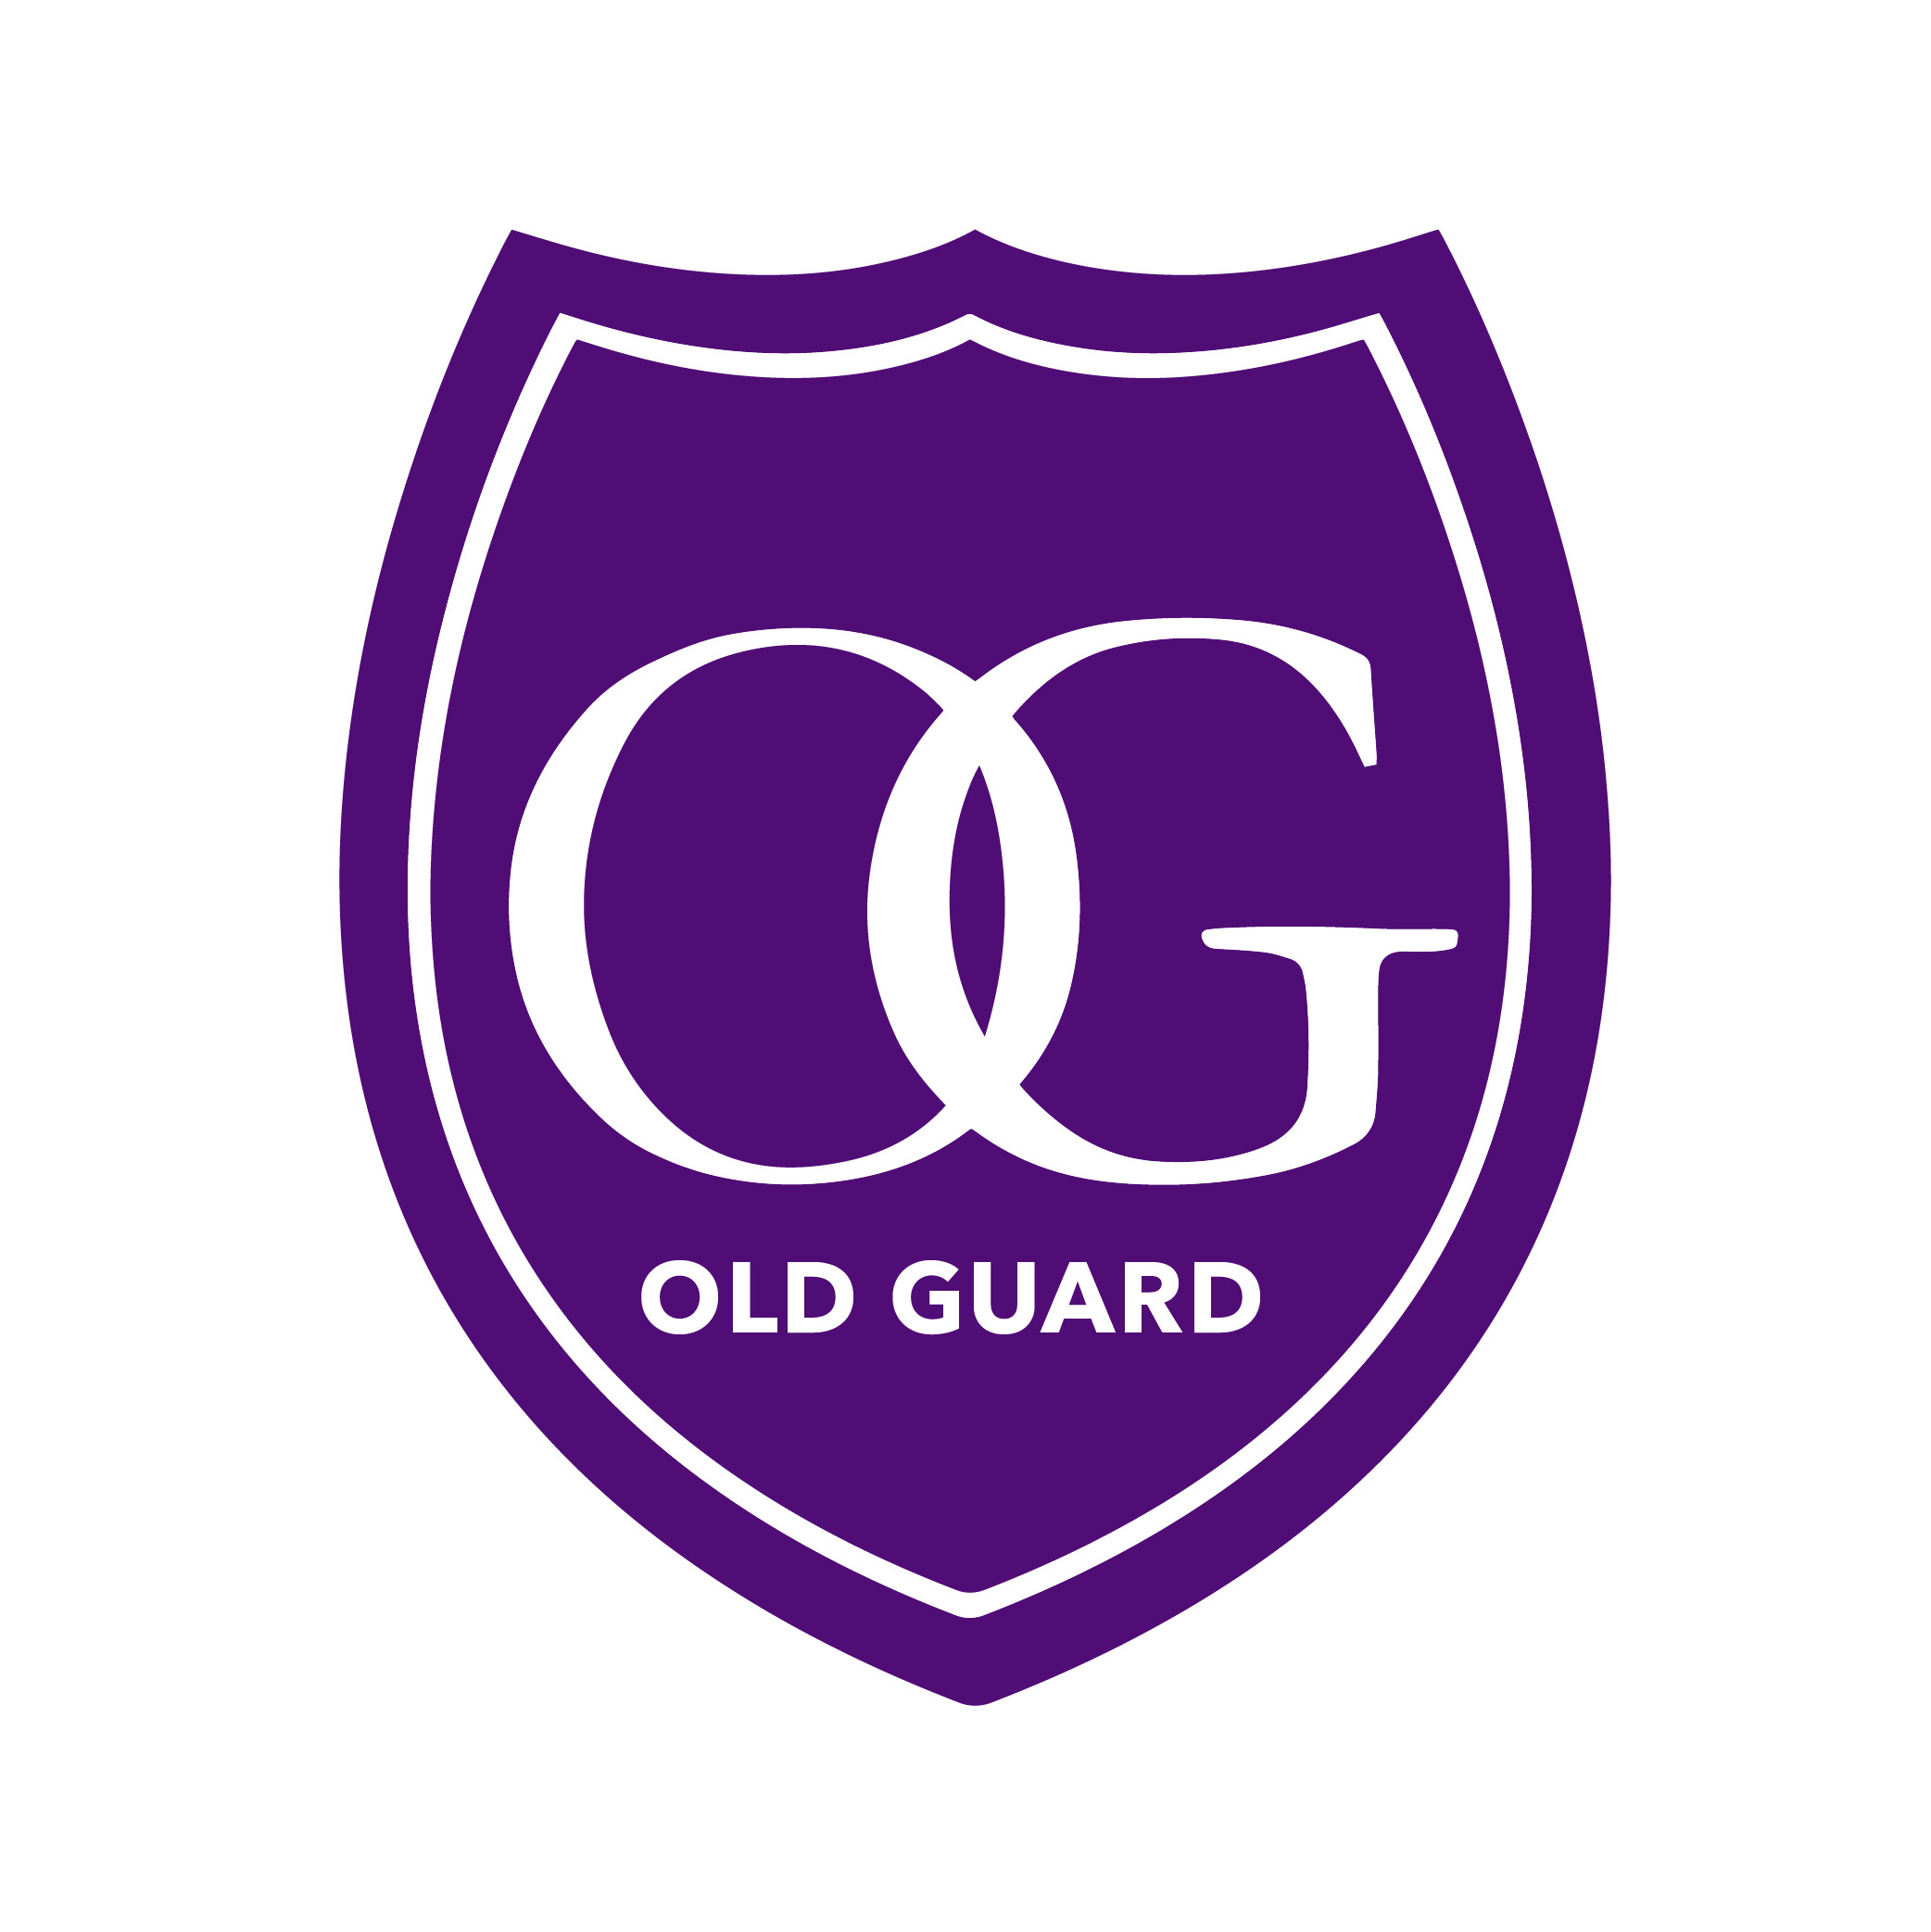 Old Guard and 50 year reunion graphic